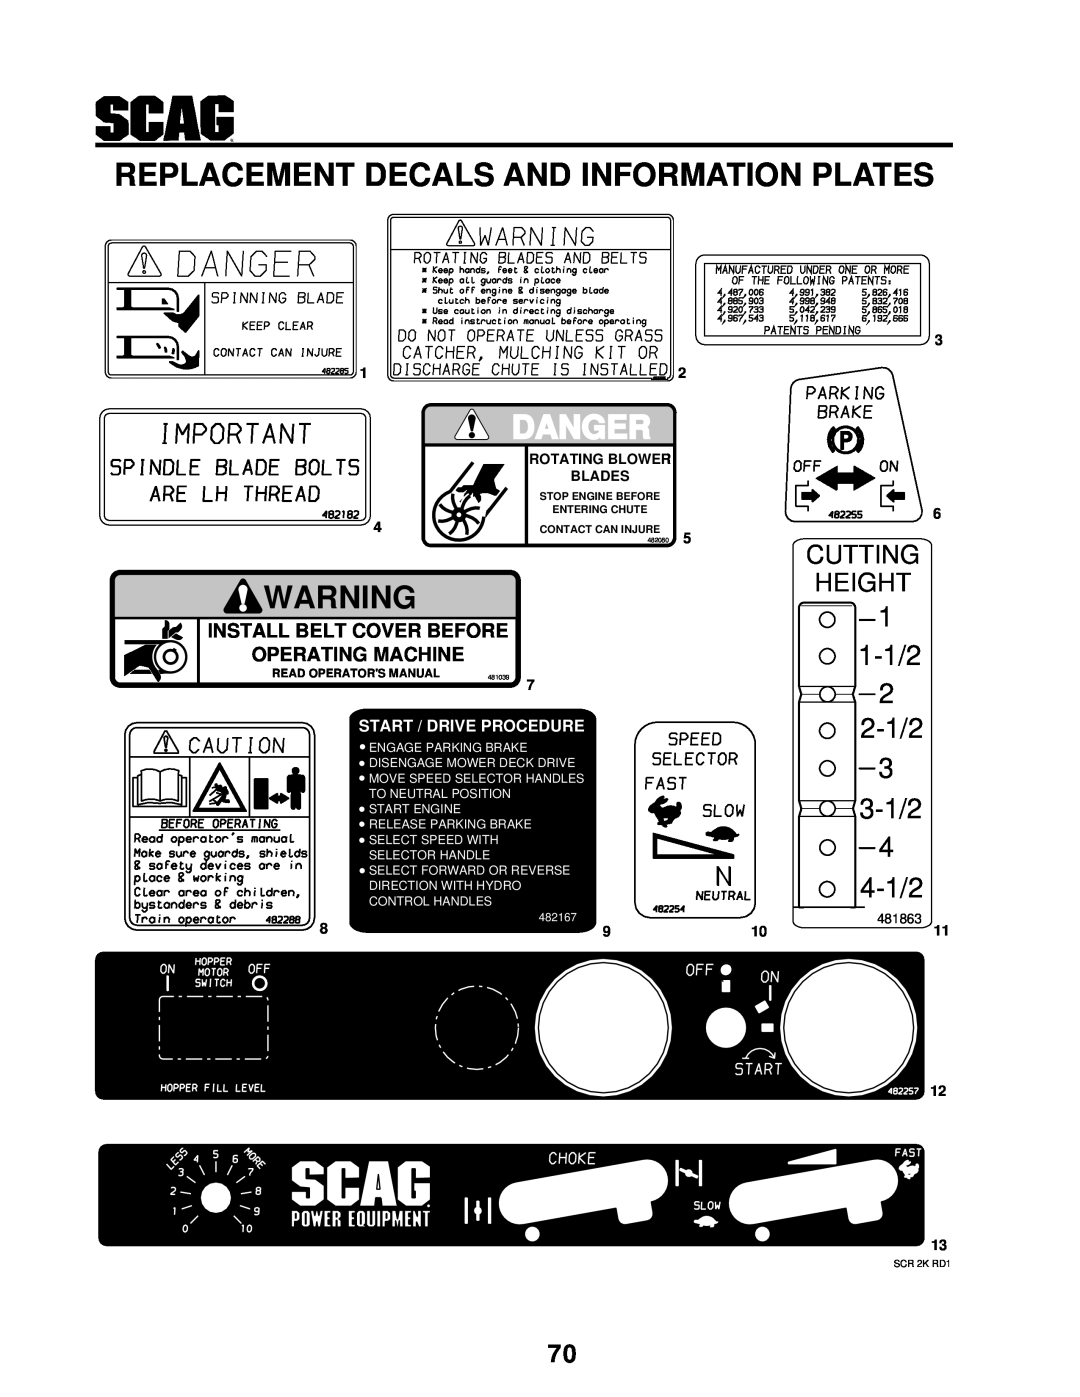 MB QUART SCR Replacement Decals And Information Plates, Danger, 1-1/2, 2-1/2, 3-1/2, 4-1/2, Cutting Height, 481863, 482167 